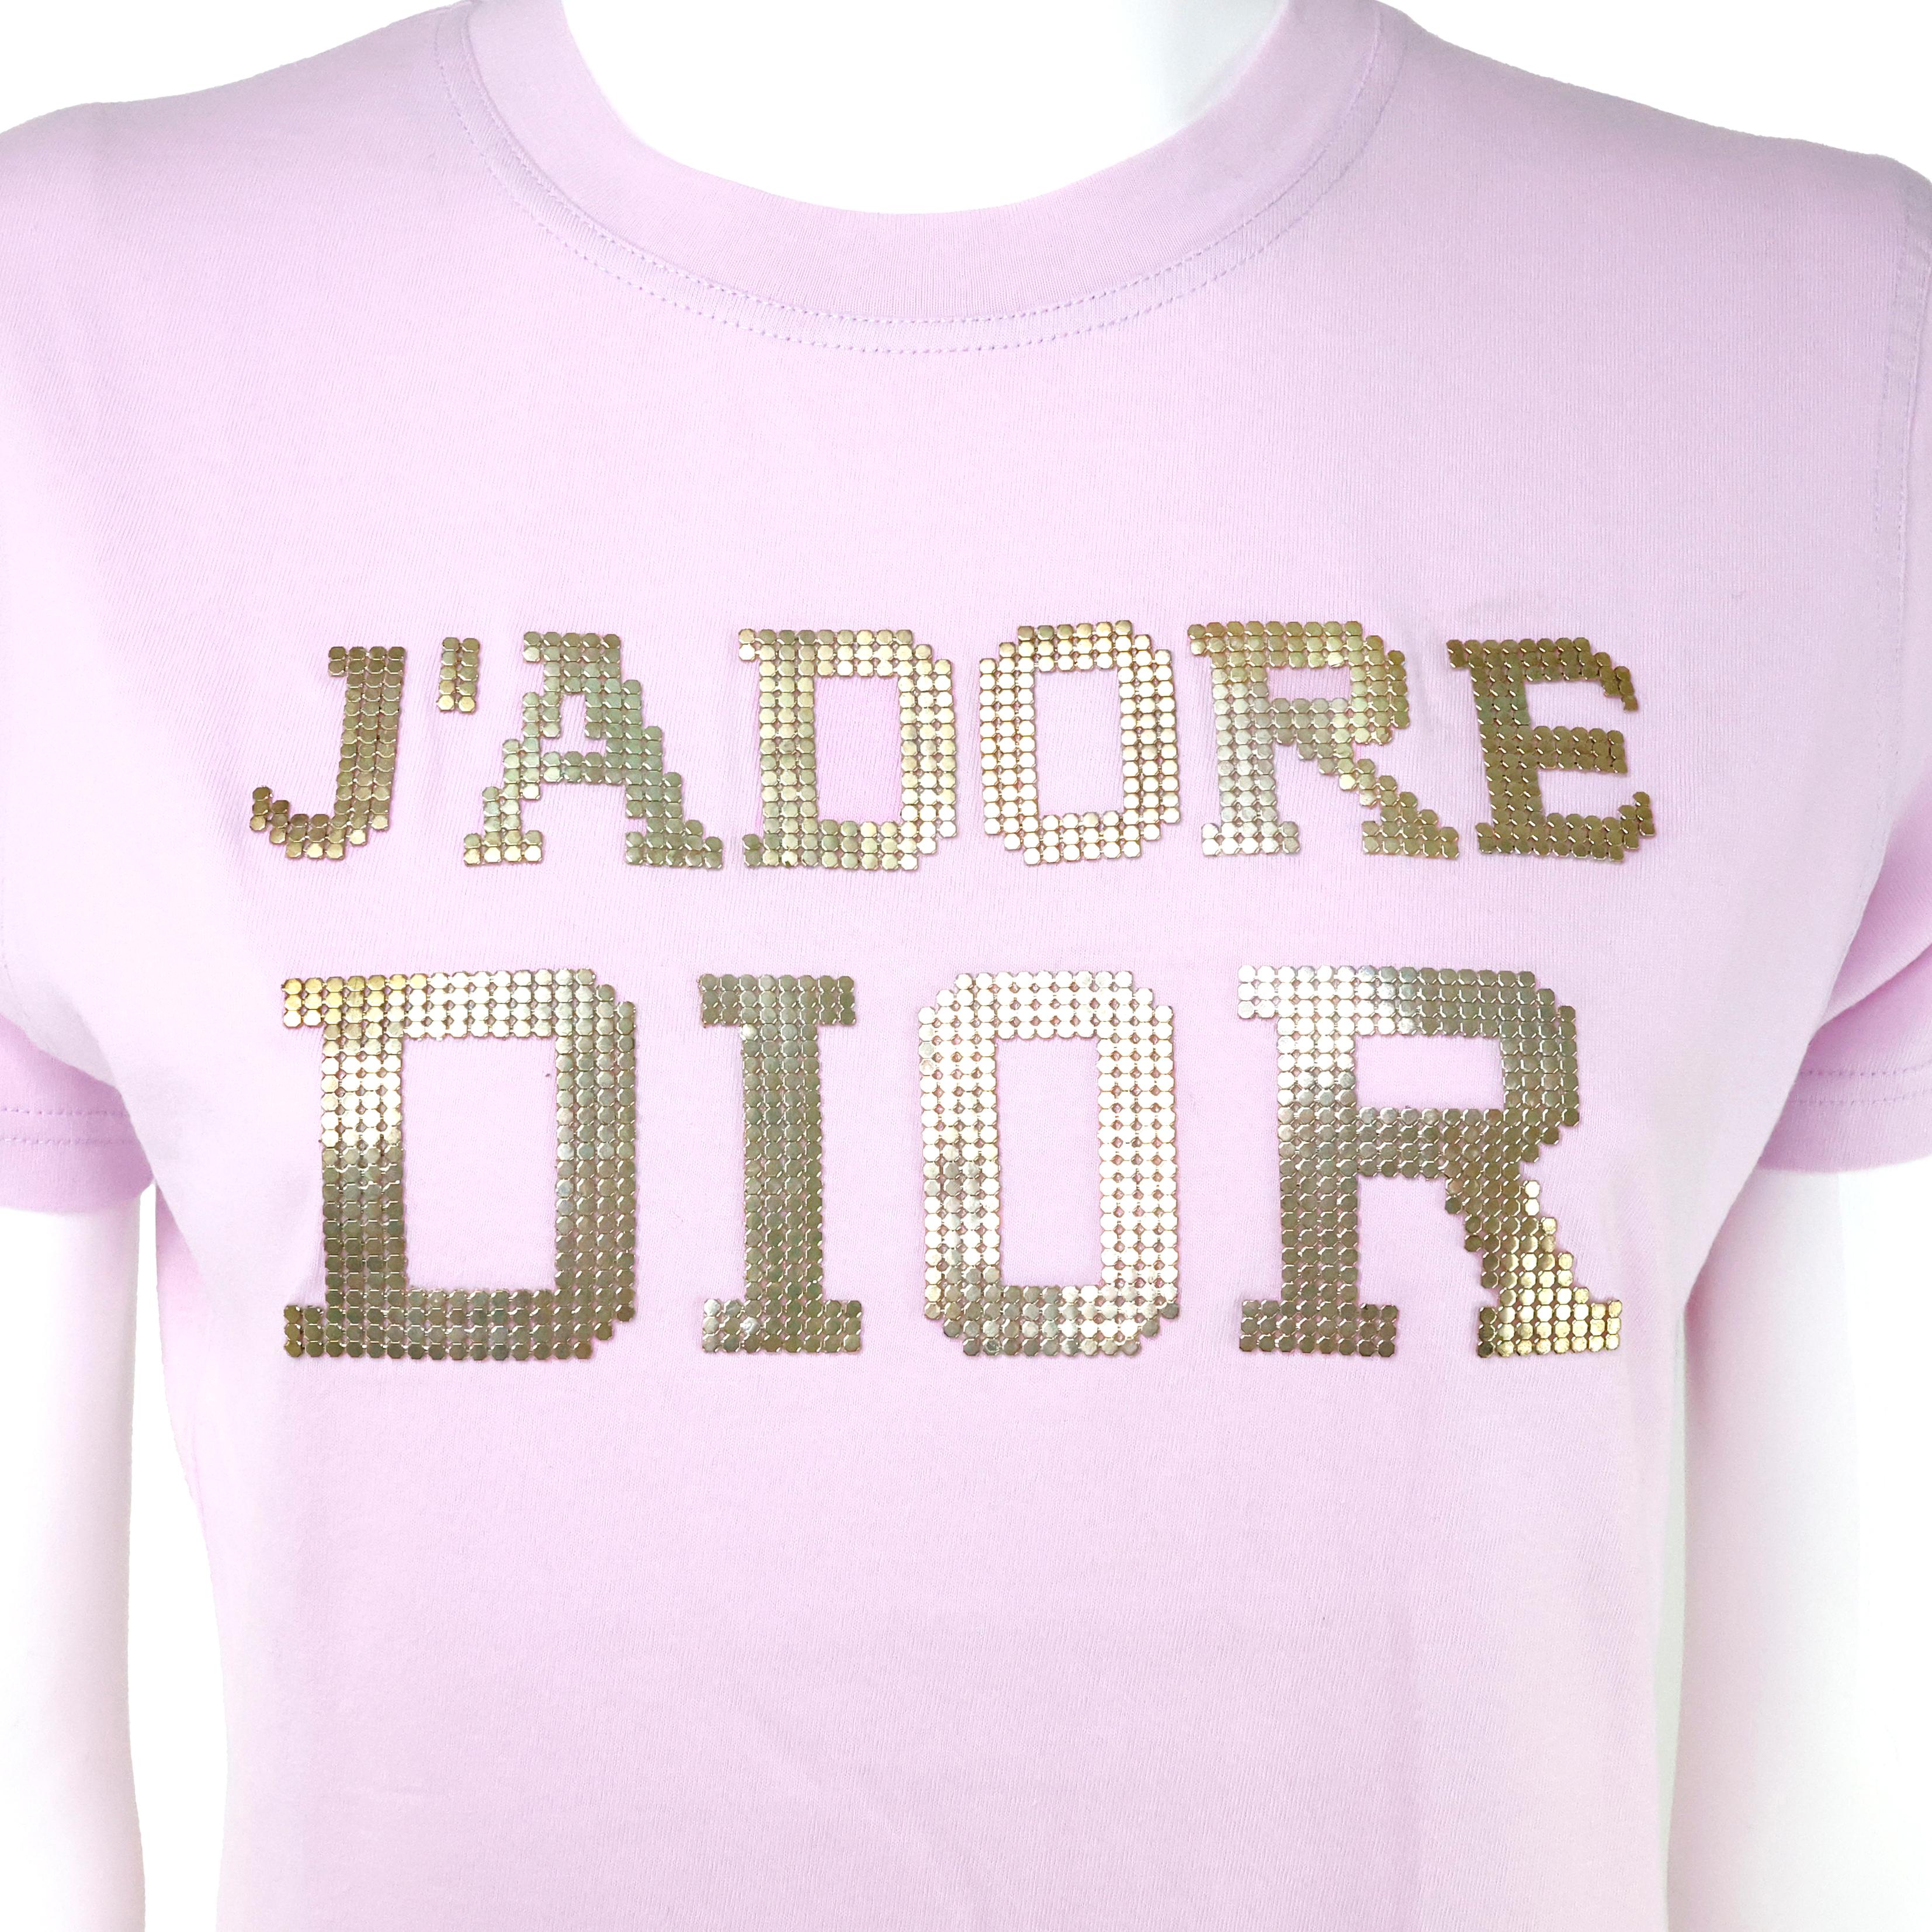 Women's Christian Dior by John Galliano J'adore Dior, The Latest Blonde T-shirt For Sale